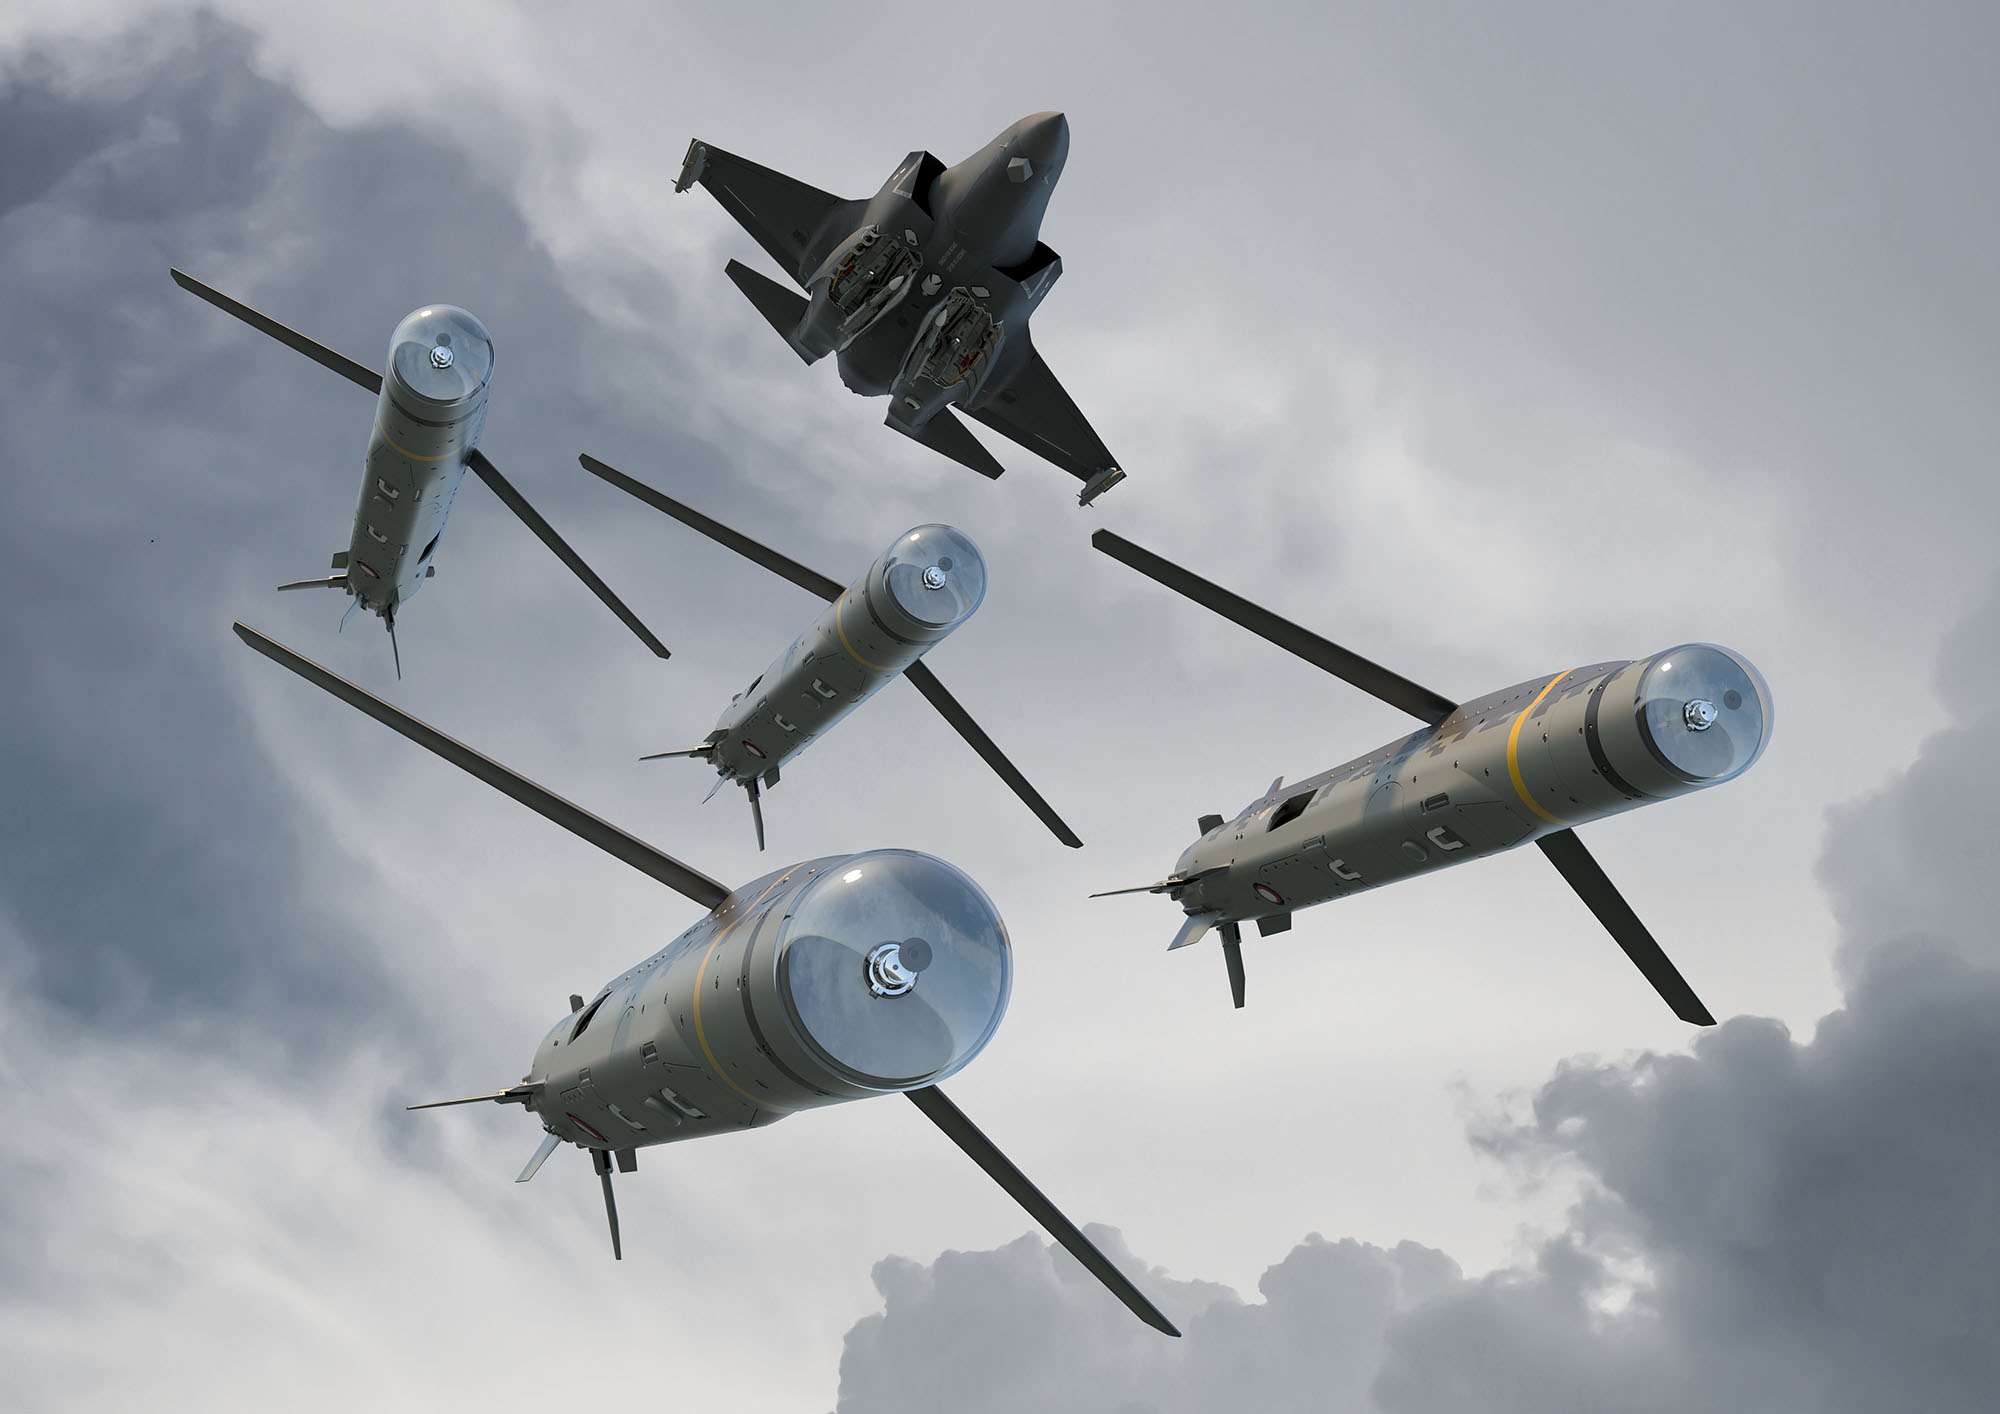 A group of missiles with wings spread fly towards the camera as a grey plane flies above, having launched them against a grey sky